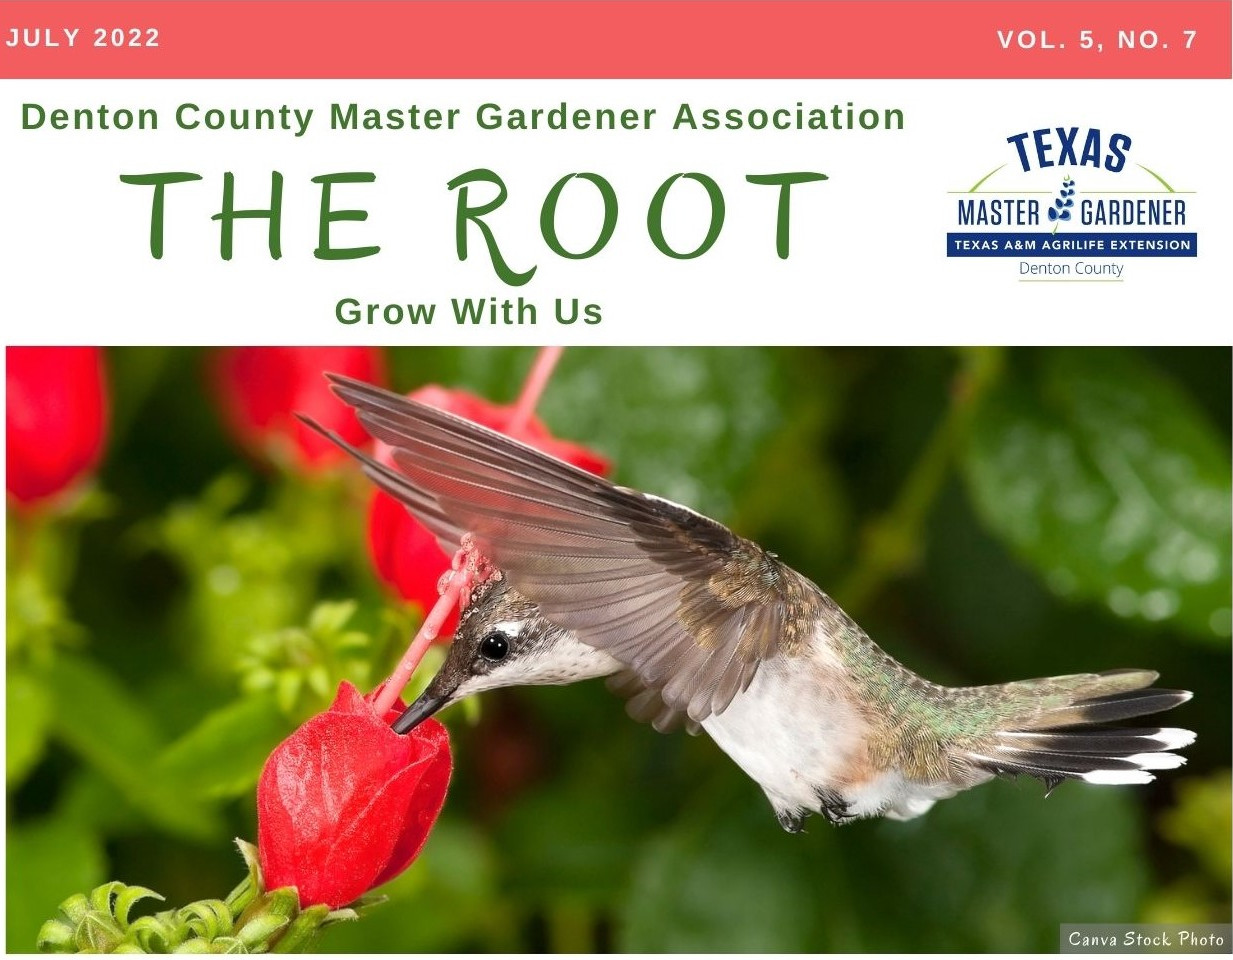 Cover of July 2022 issue of The Root, the free digital monthly gardening magazine published by the Denton County Master Gardener Association.